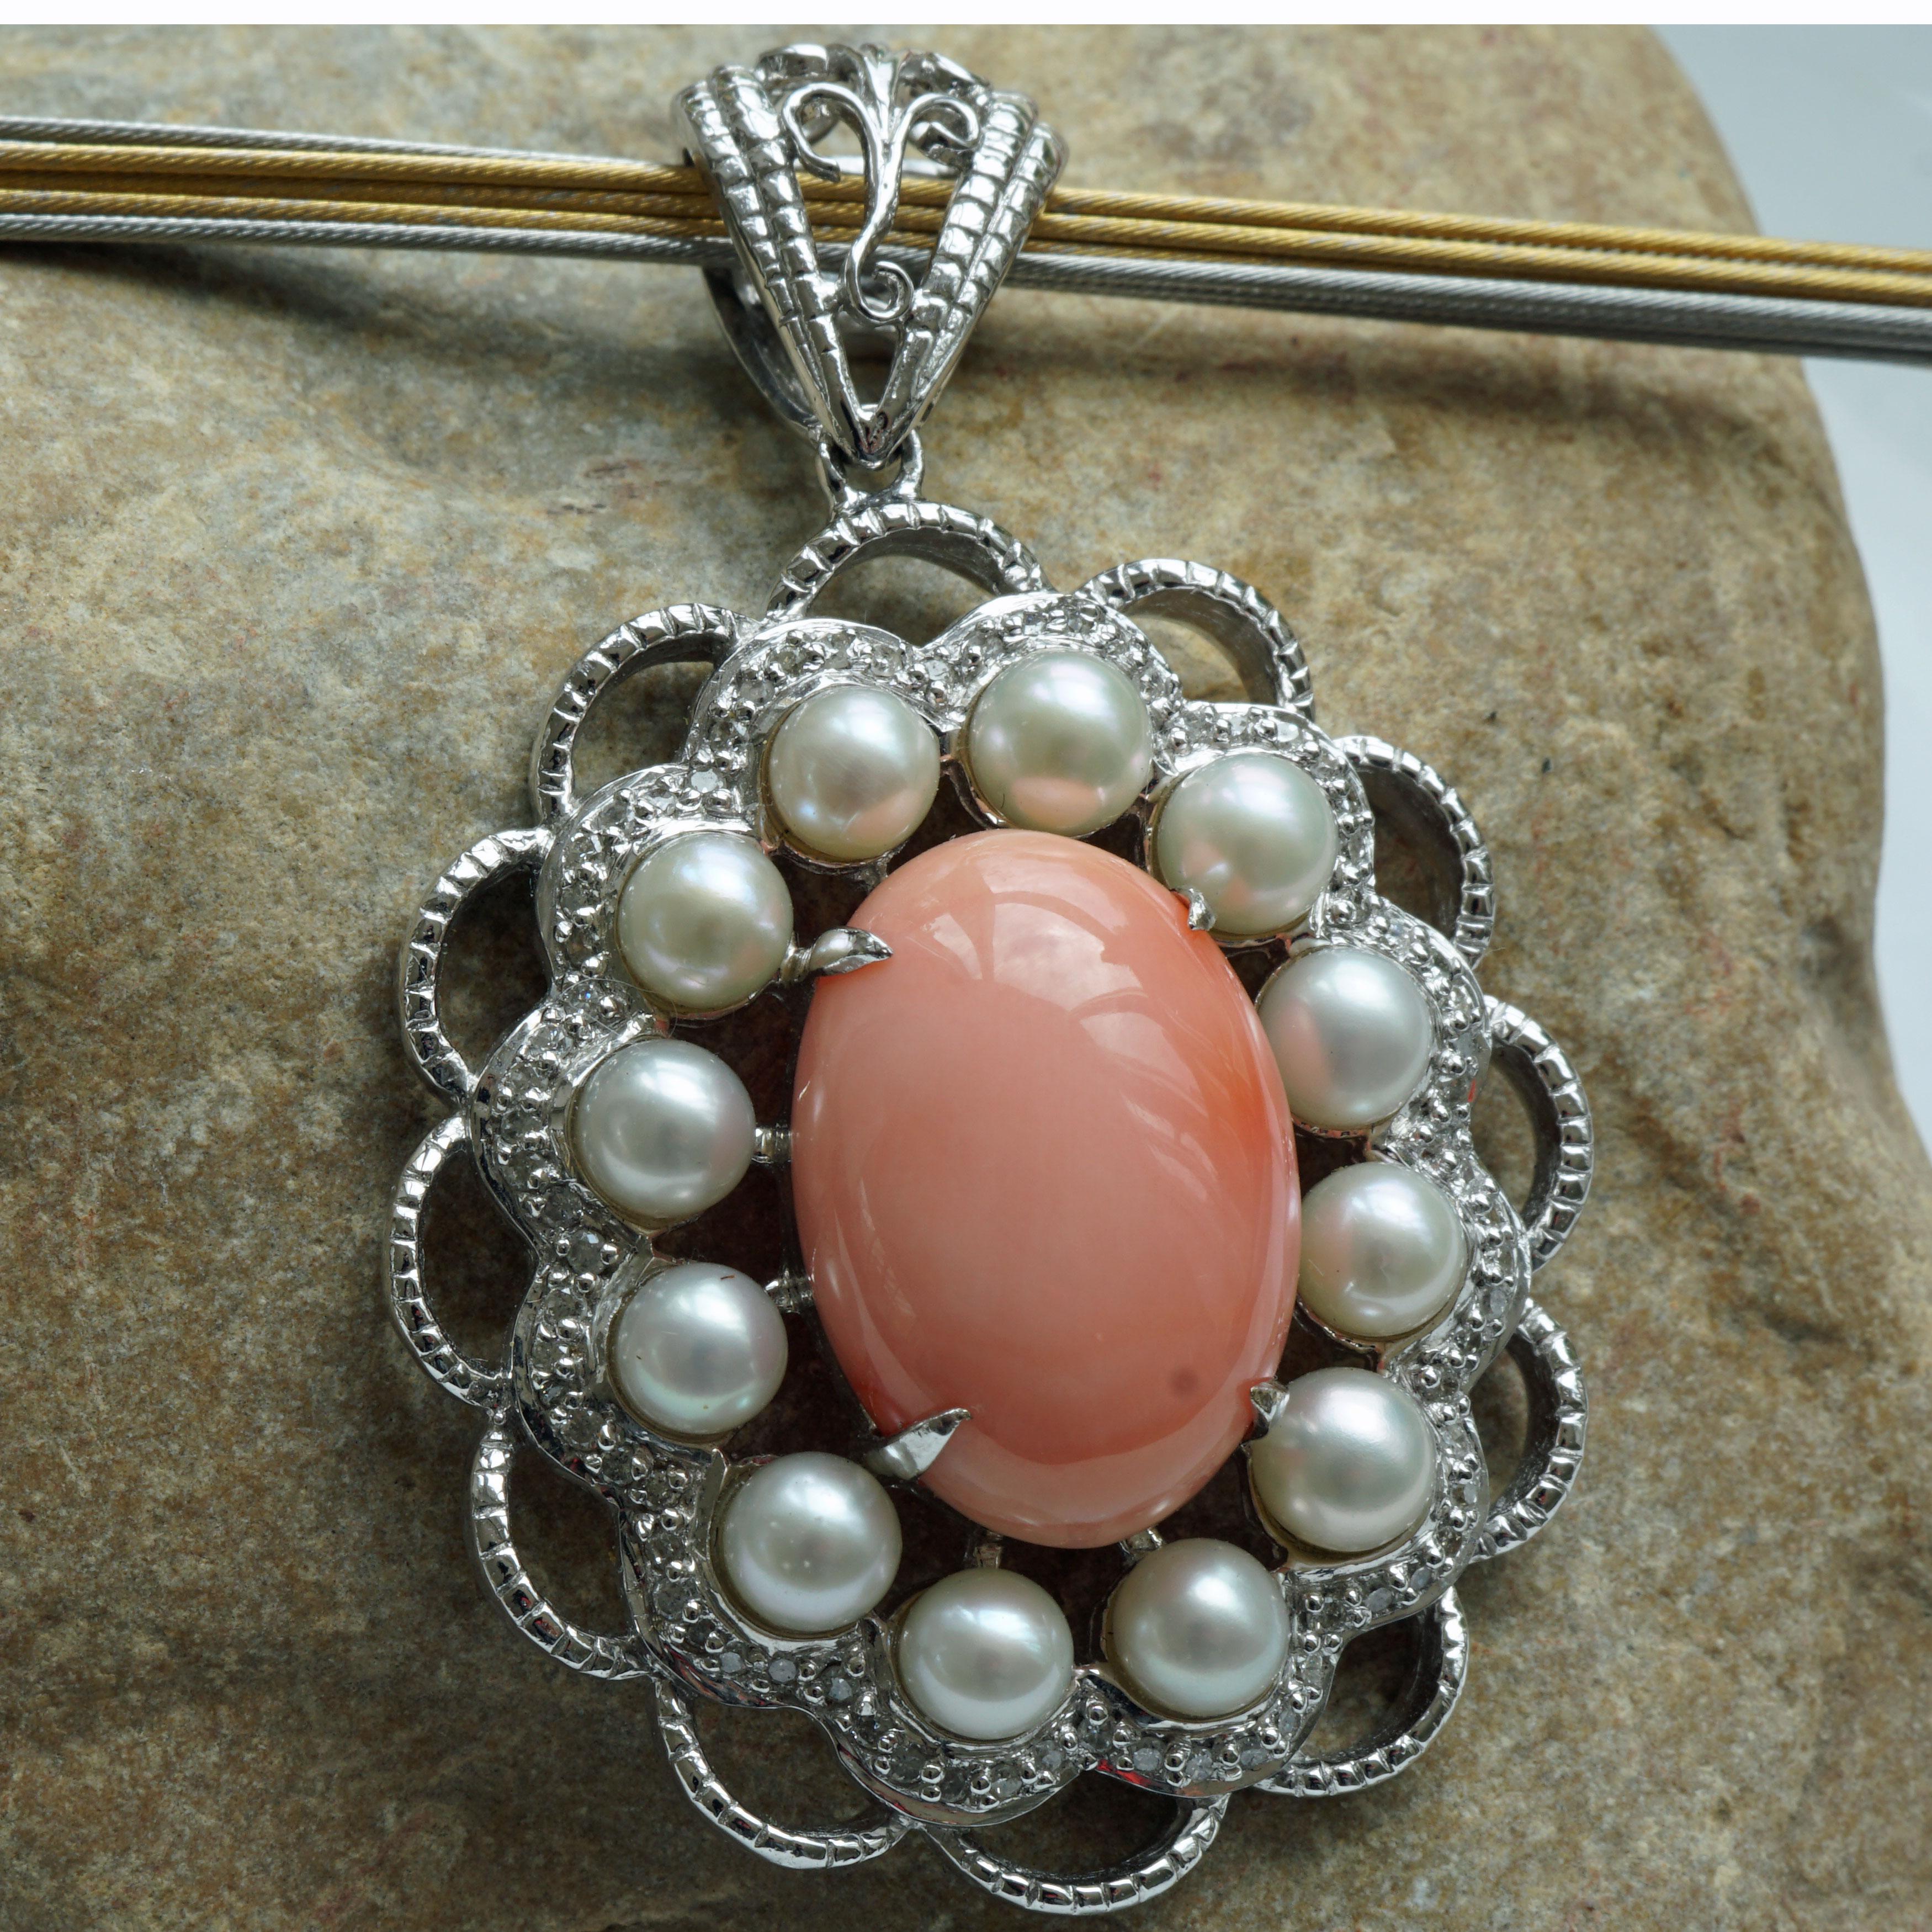 Baroque Revival Coral Brilliant Pendant 15 grams in 18 kt Gold like for Catherine the Great For Sale